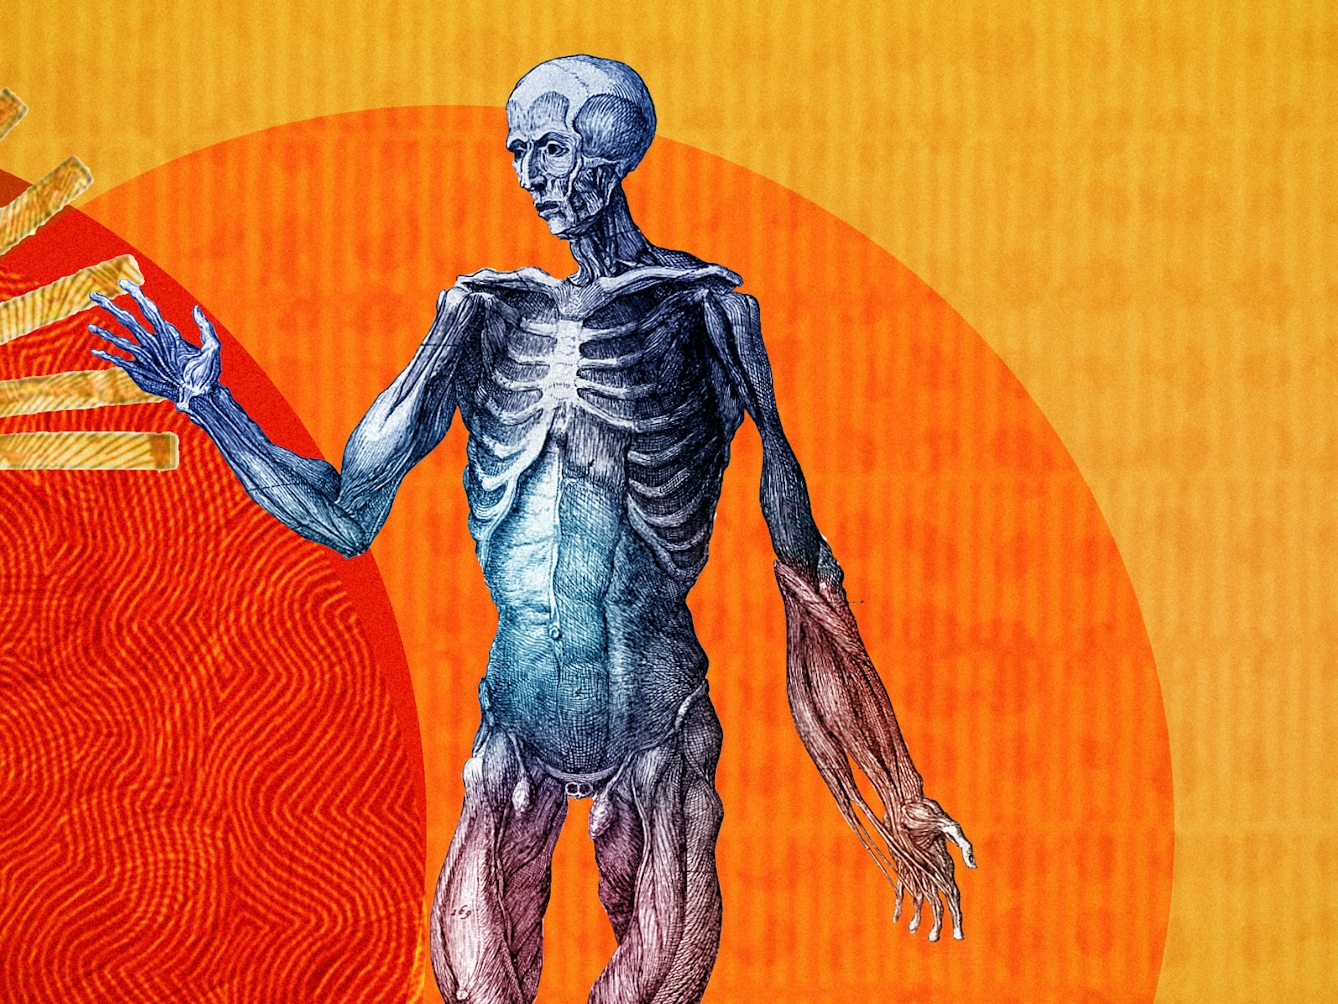 Detail from a larger abstract digital illustration featuring three anatomical depictions of the human body. This image depicts the muscular structure. Circles of energy are shown to be radiating from each of the bodies, overlapping each other. The main colour combinations are yellows, reds and oranges. The background shapes contain textures and patterns.